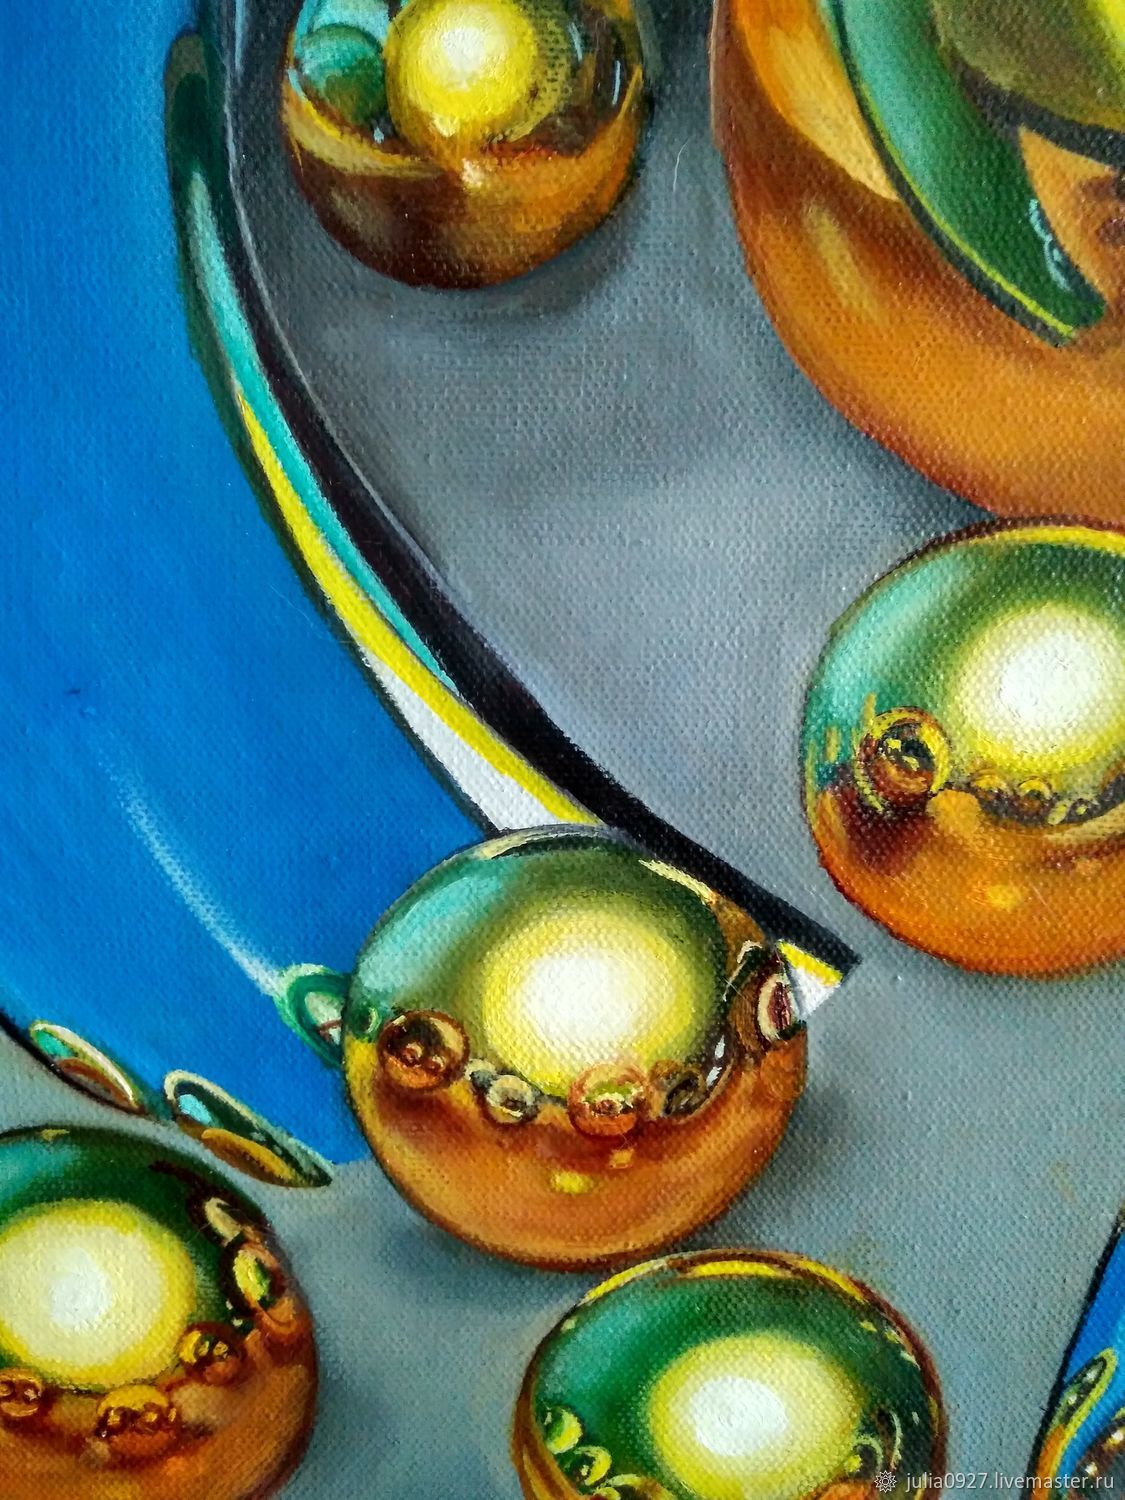 Painting Interior Abstraction Golden Balls Hyperrealism Oil On Canvas